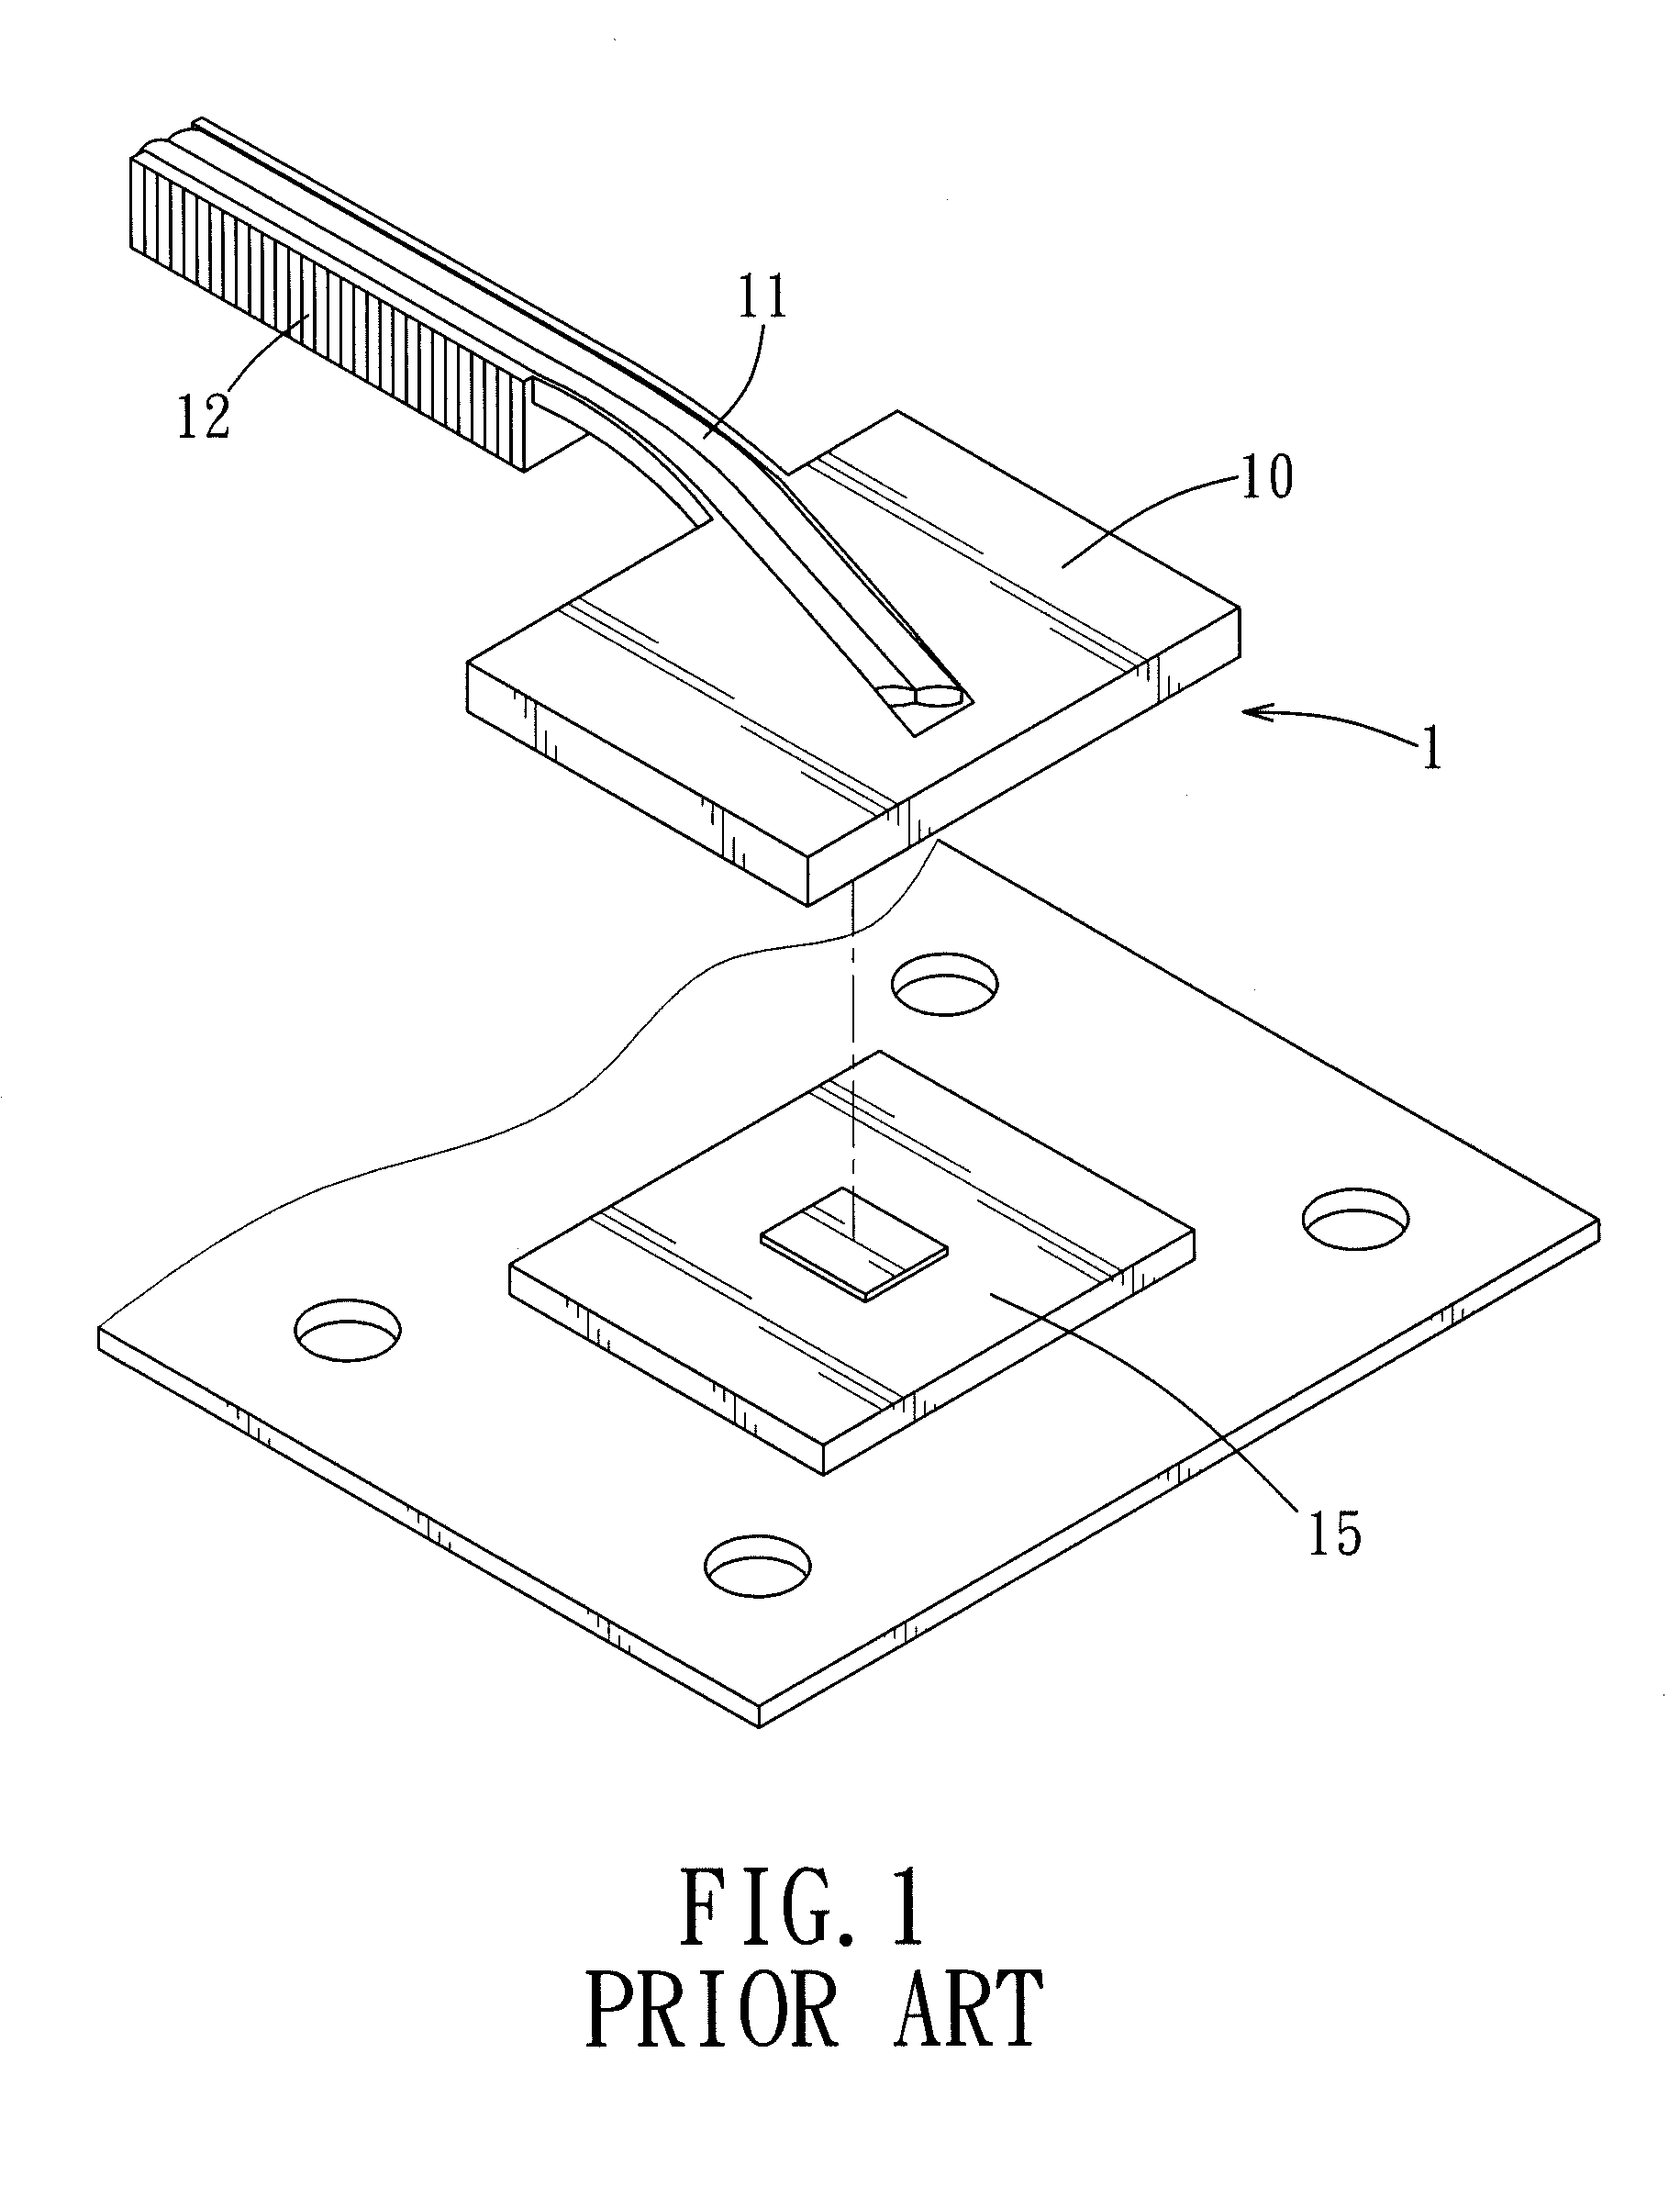 Heat-dissipating module having a dust removing mechanism, and assembly of an electronic device and the heat-dissipating module